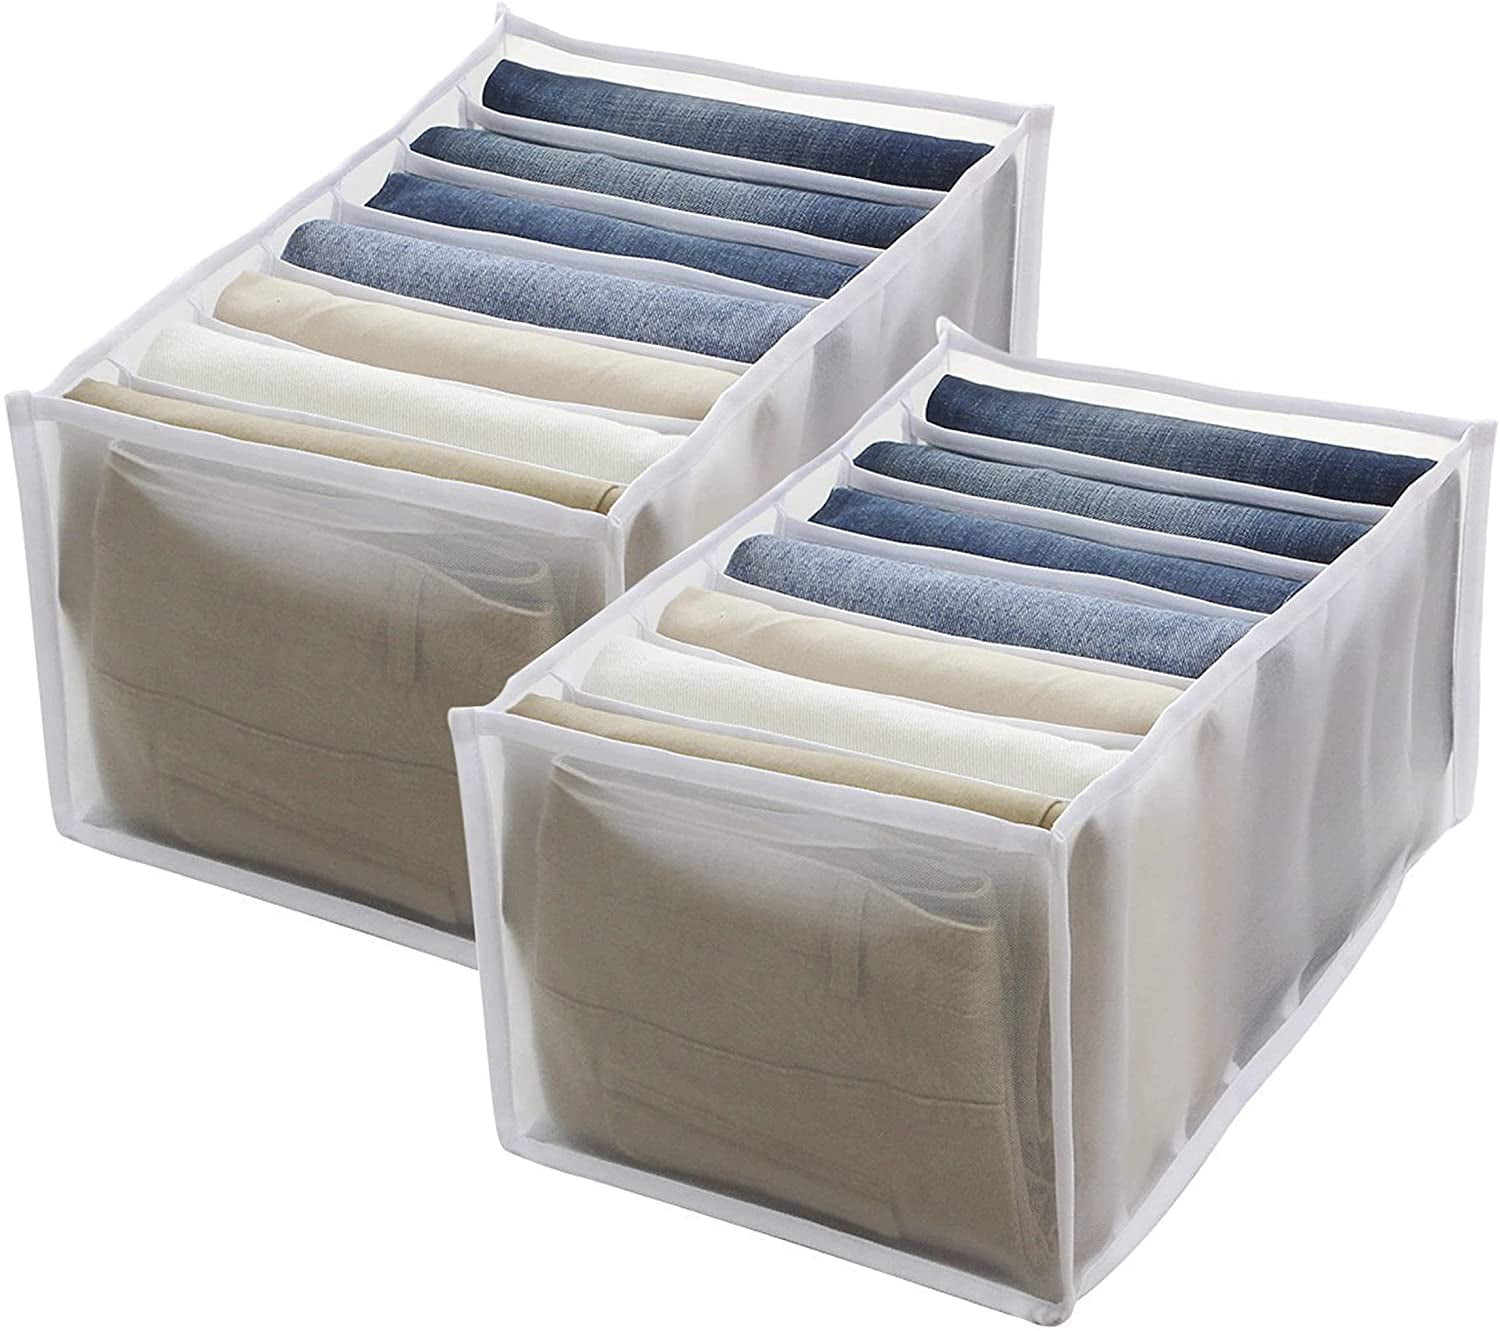 Details about   3 Pack Collapsible Cube Storage Container Fabric Organizer Assorted Colors 7x7x7 